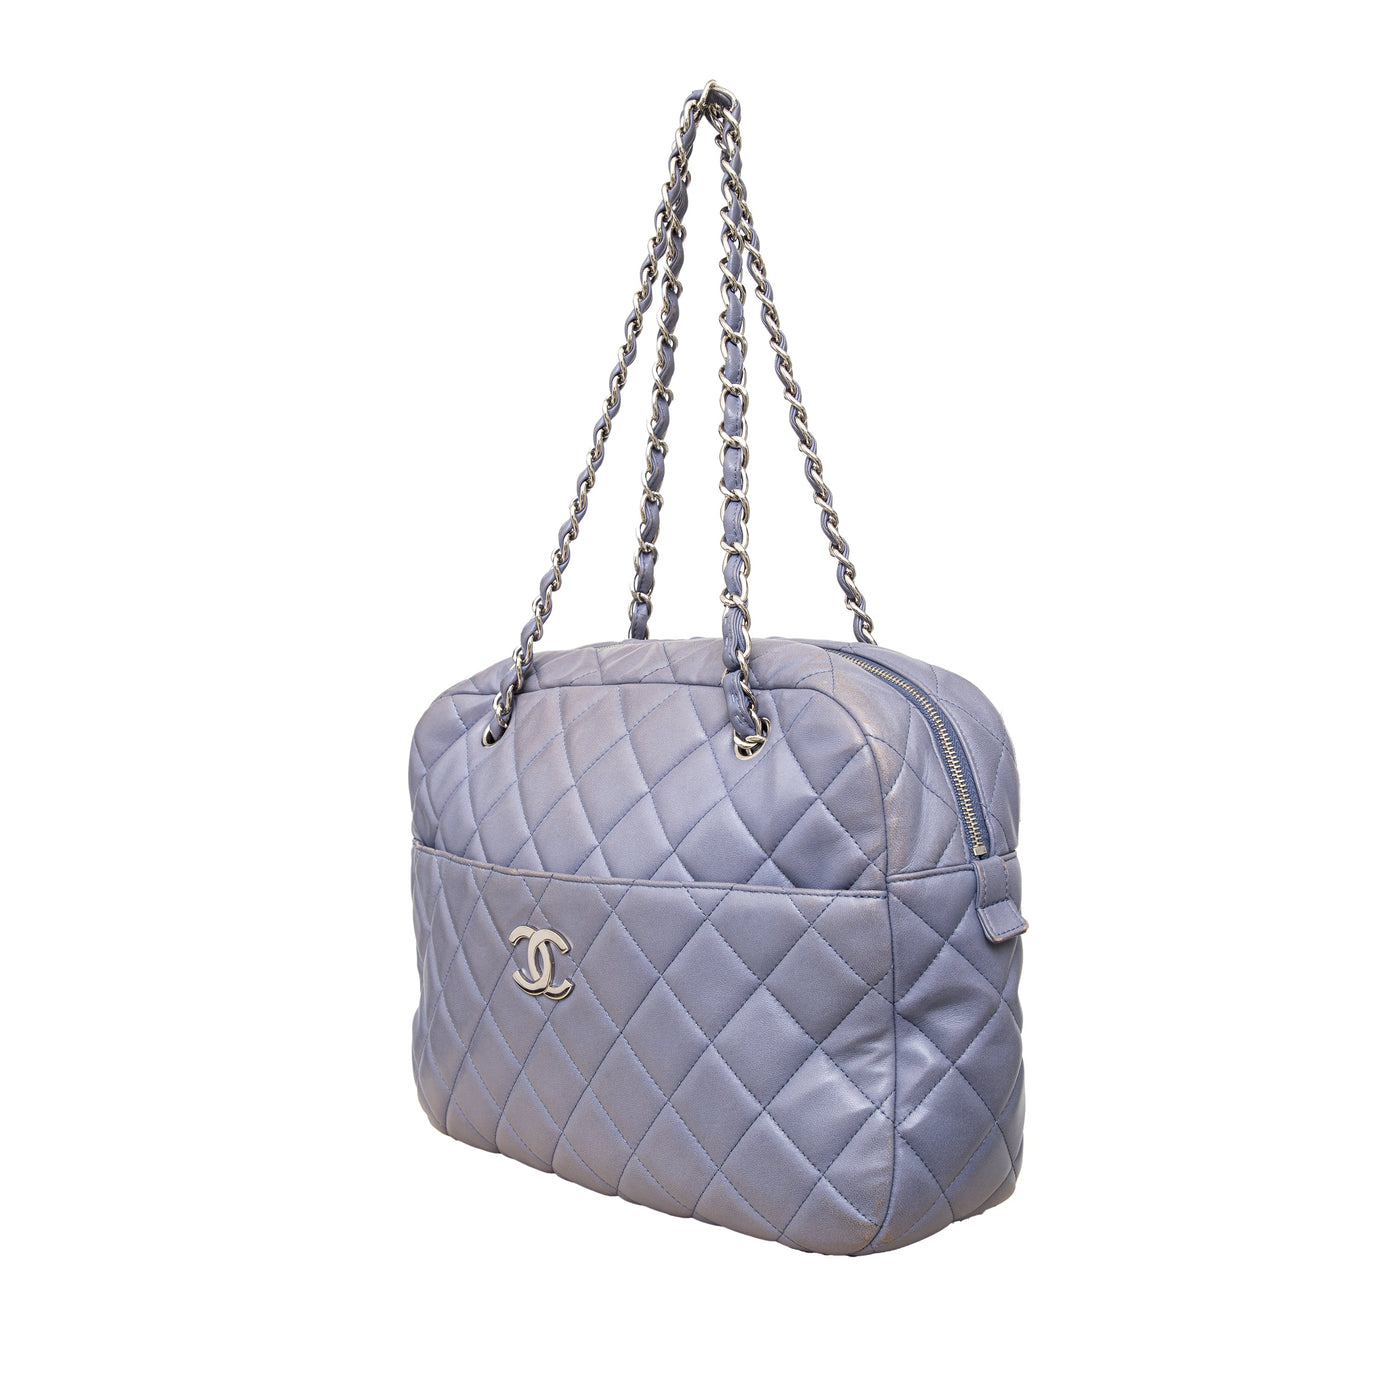 Secondhand Chanel Quilted Leather Camera Bag